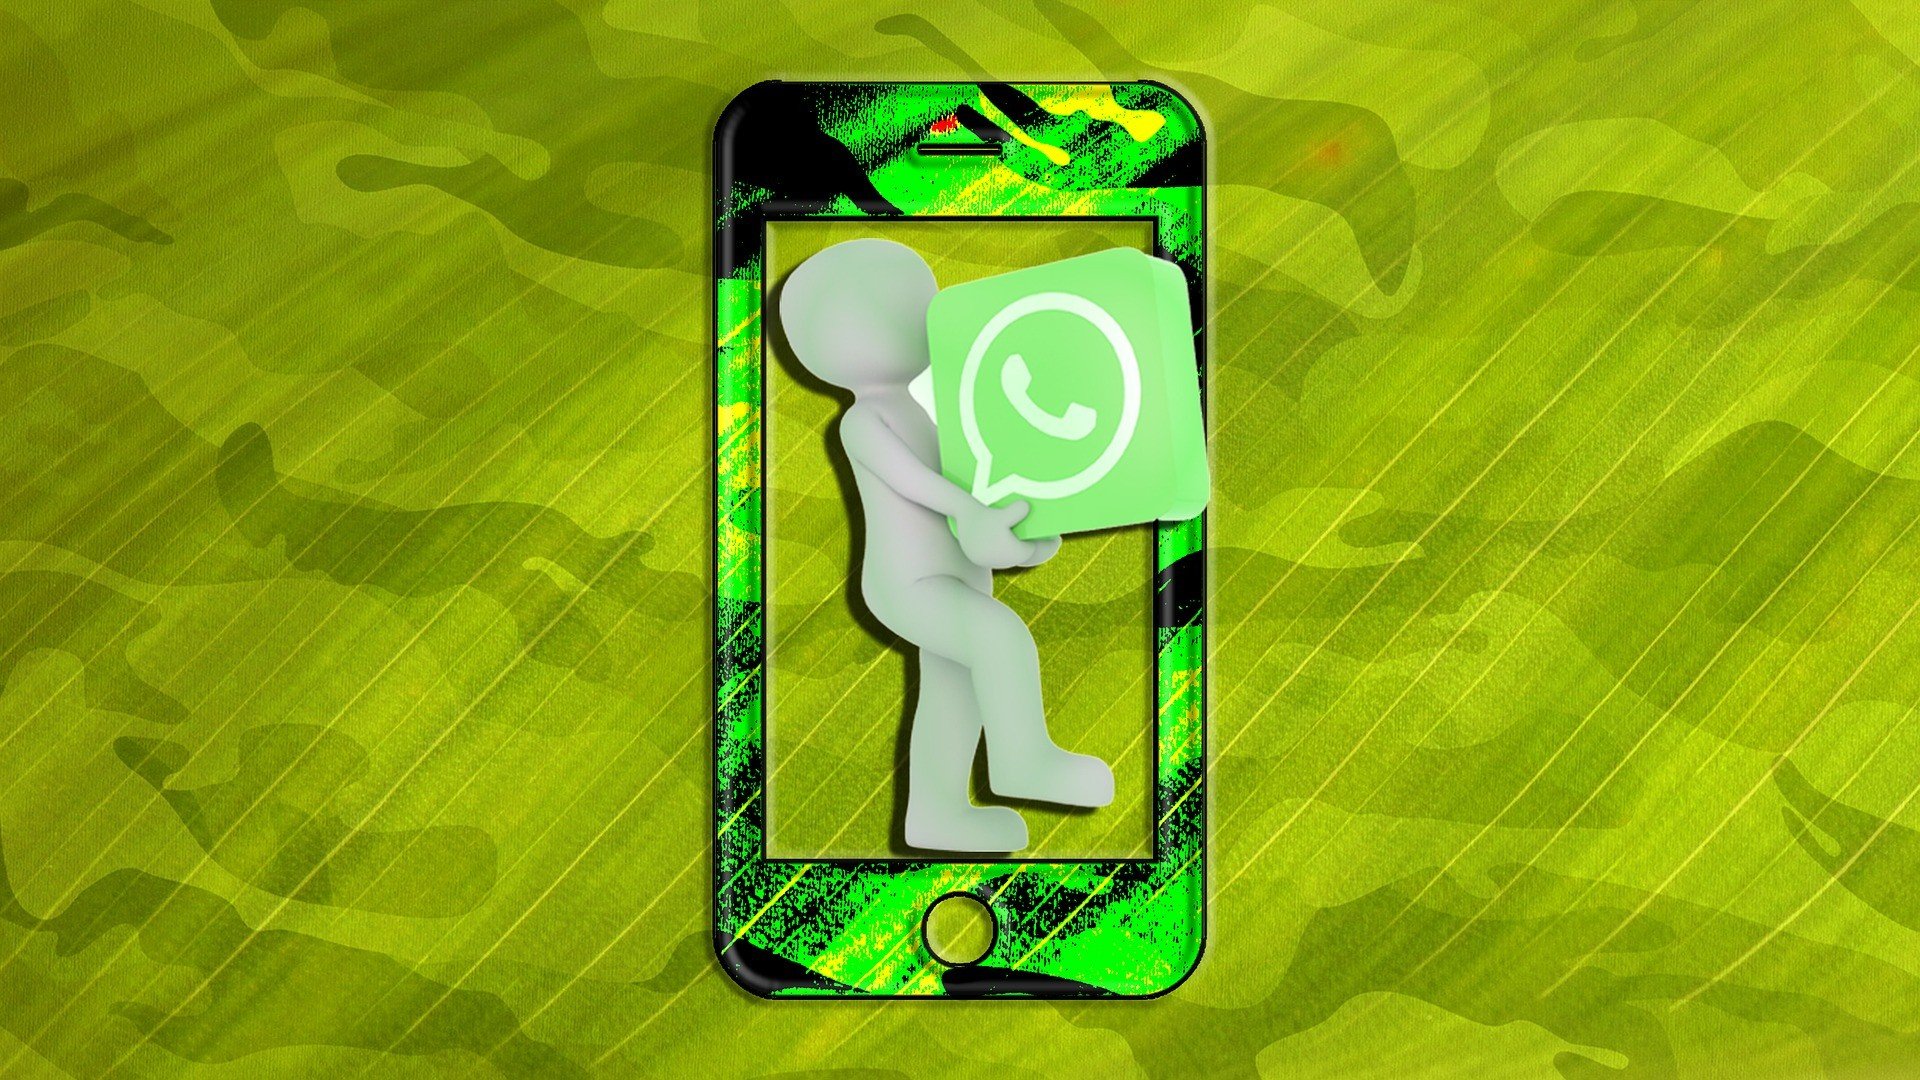 WhatsApp will allow you to flag inappropriate status updates